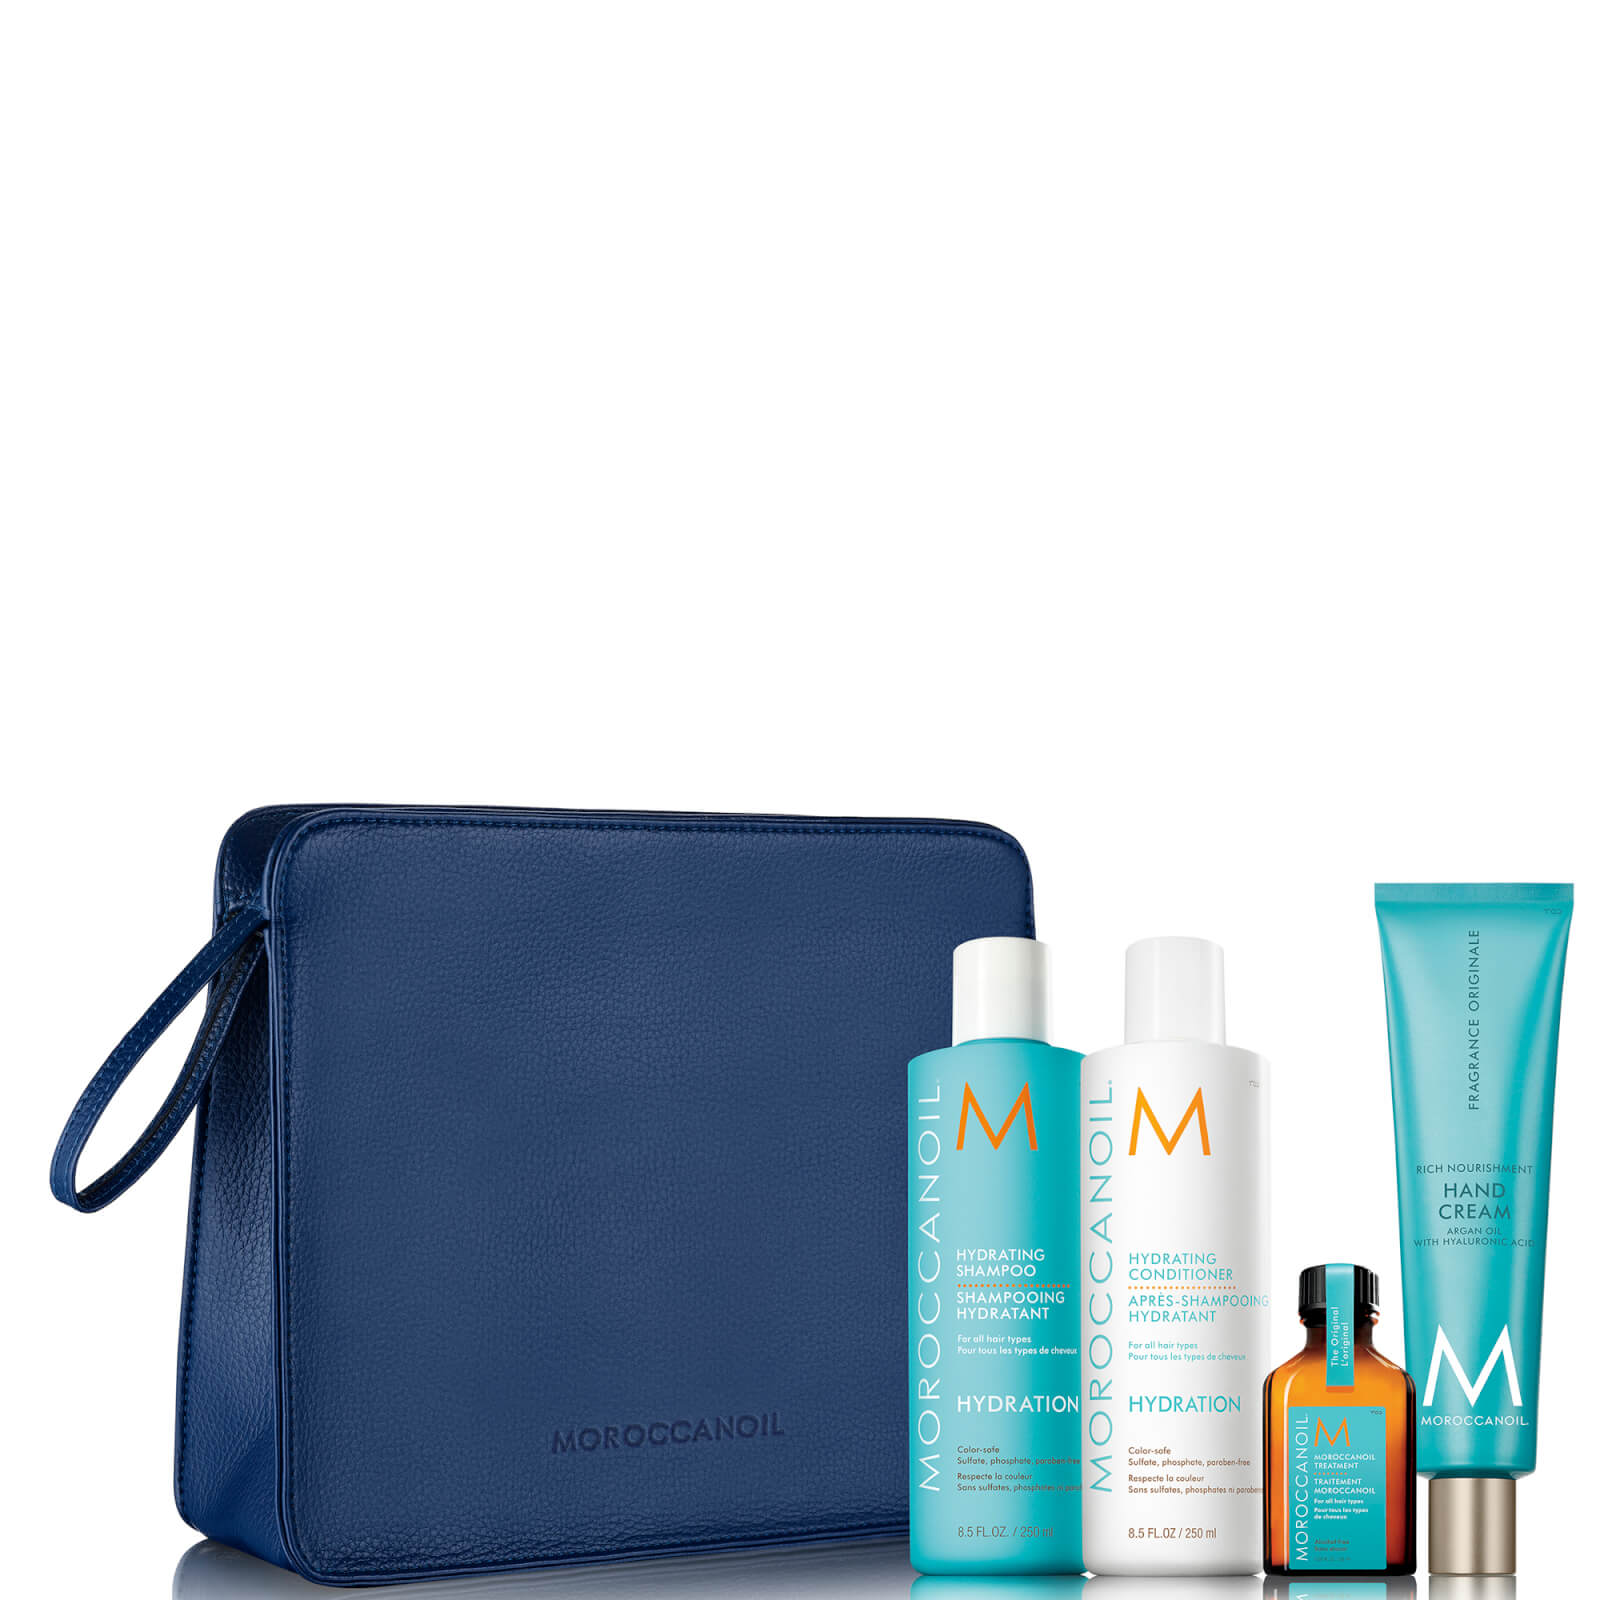 Moroccanoil Hydration Shampoo and Conditioner 250ml with Gifts